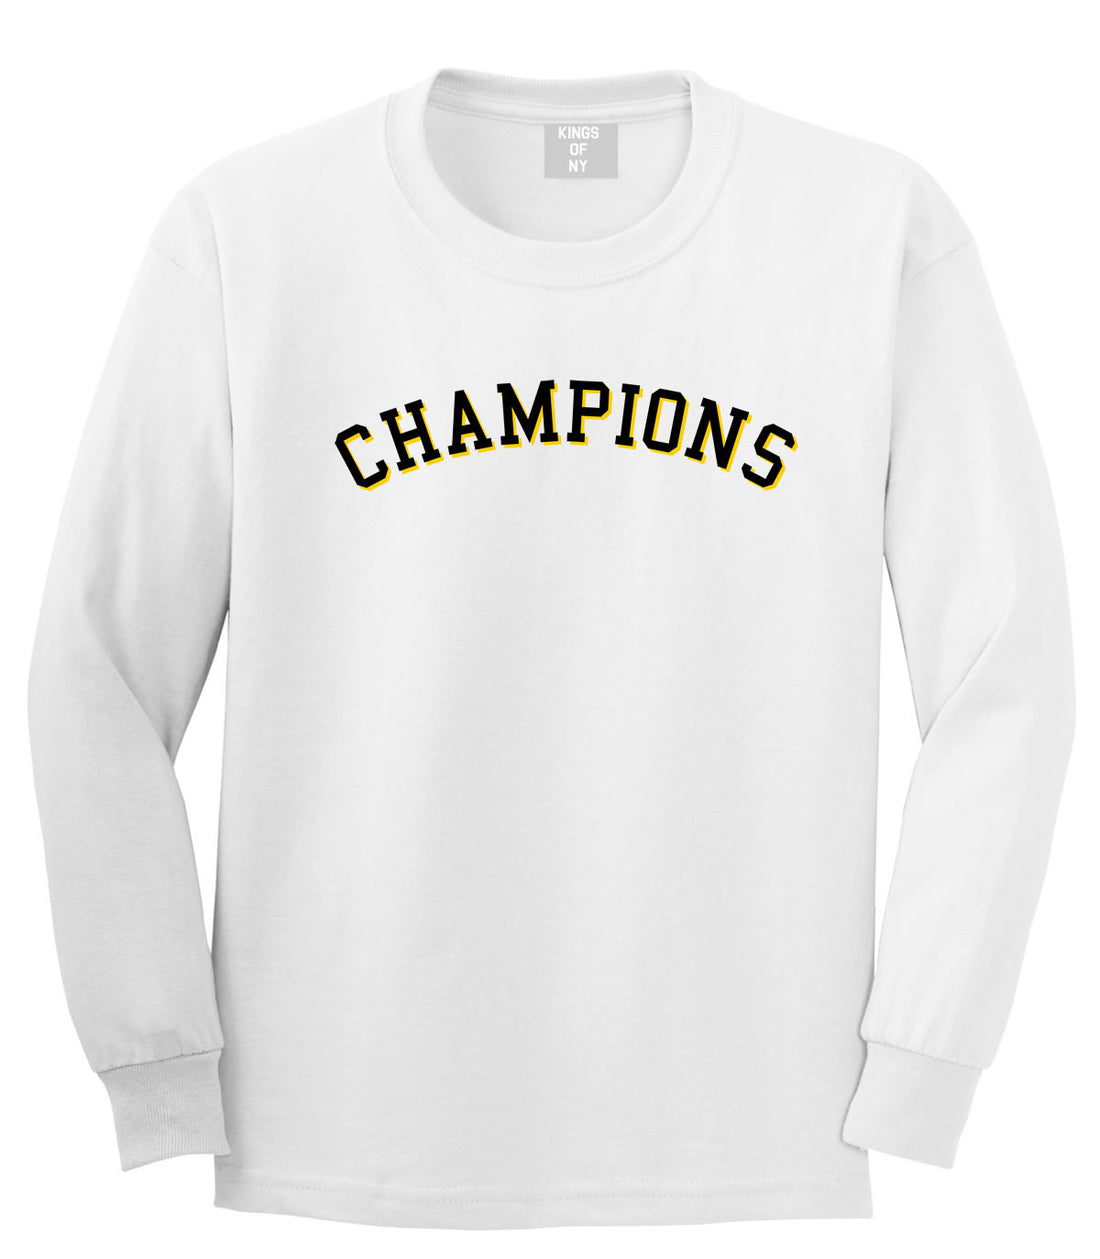 Champions Boys Kids Long Sleeve T-Shirt in White by Kings Of NY